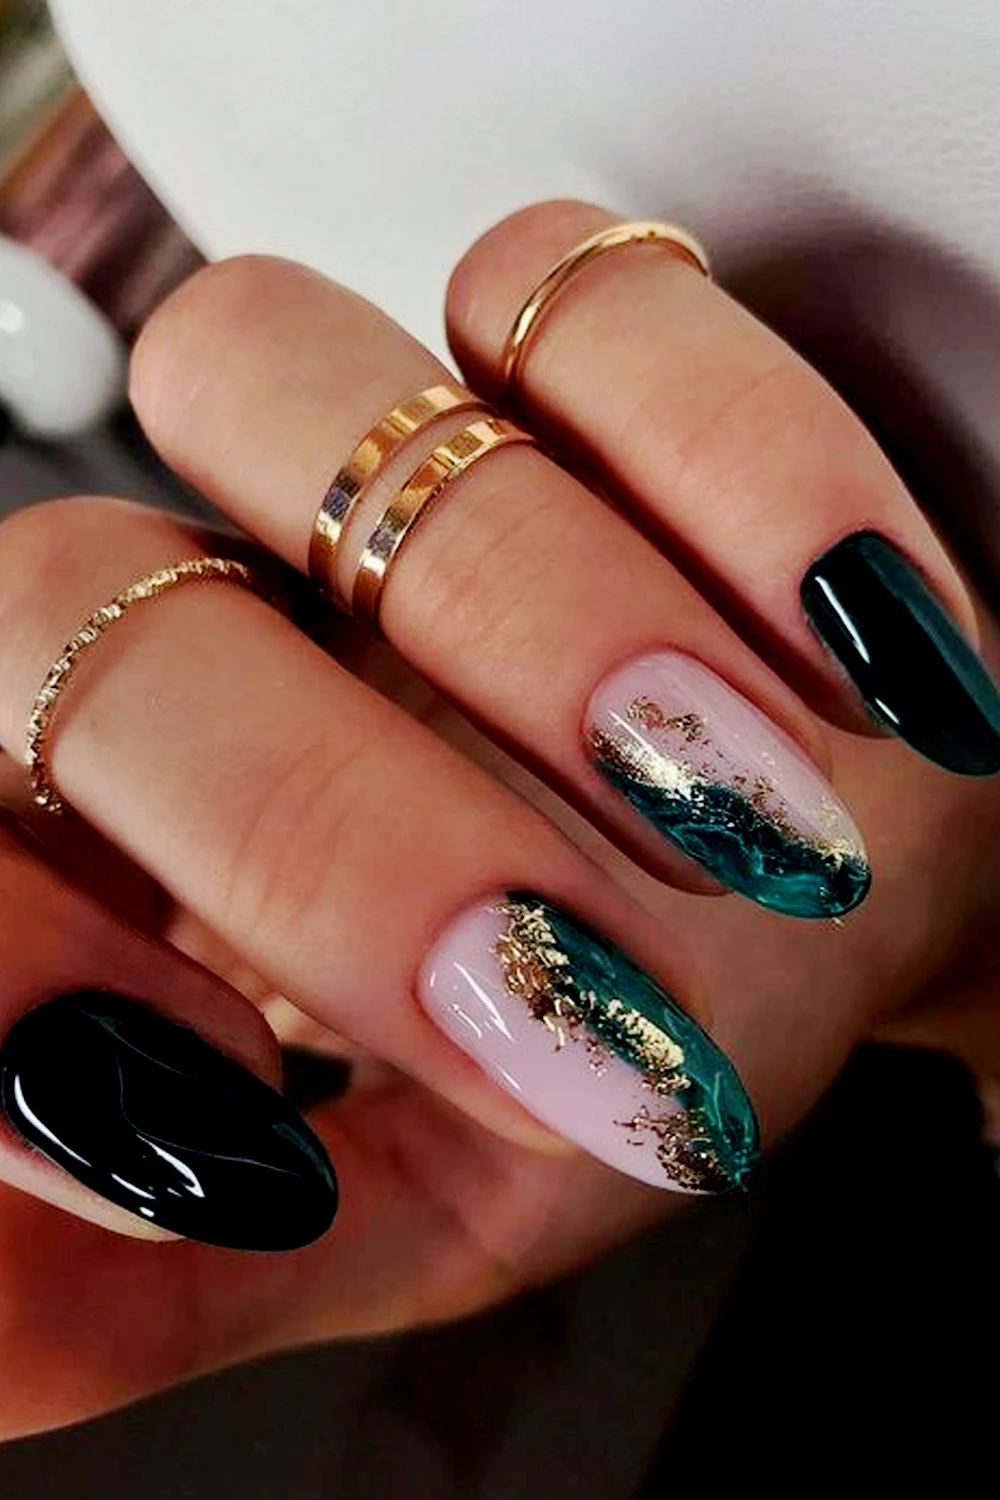 The Best Acrylic Nails in Vancouver